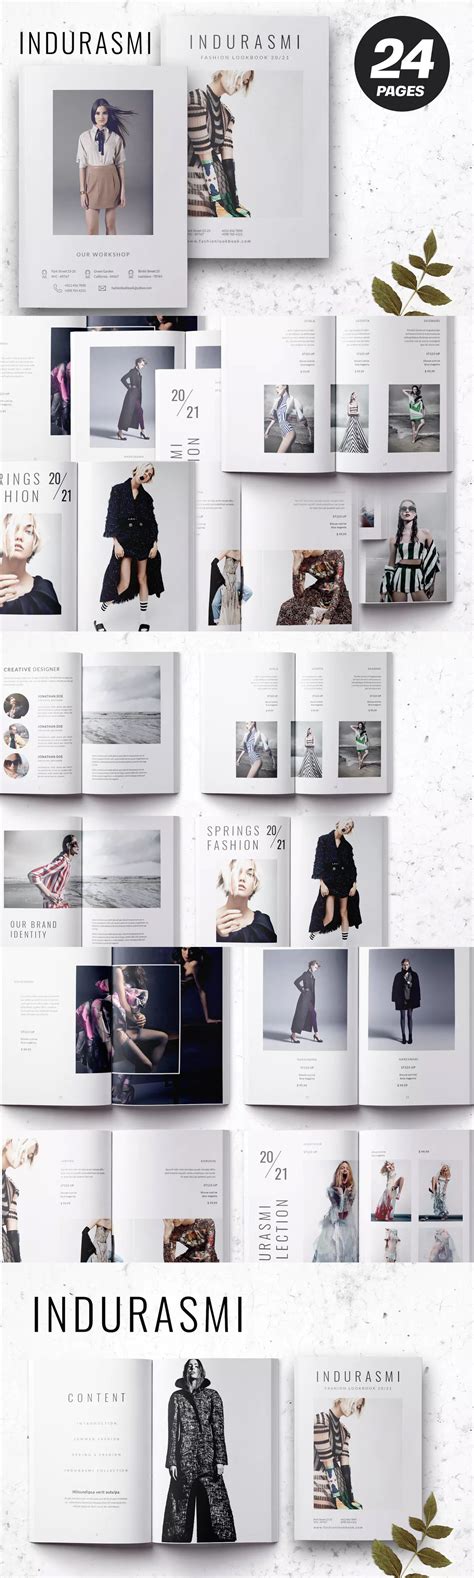 Fashion Lookbook Template InDesign INDD | Fashion lookbook, Lookbook design, Lookbook